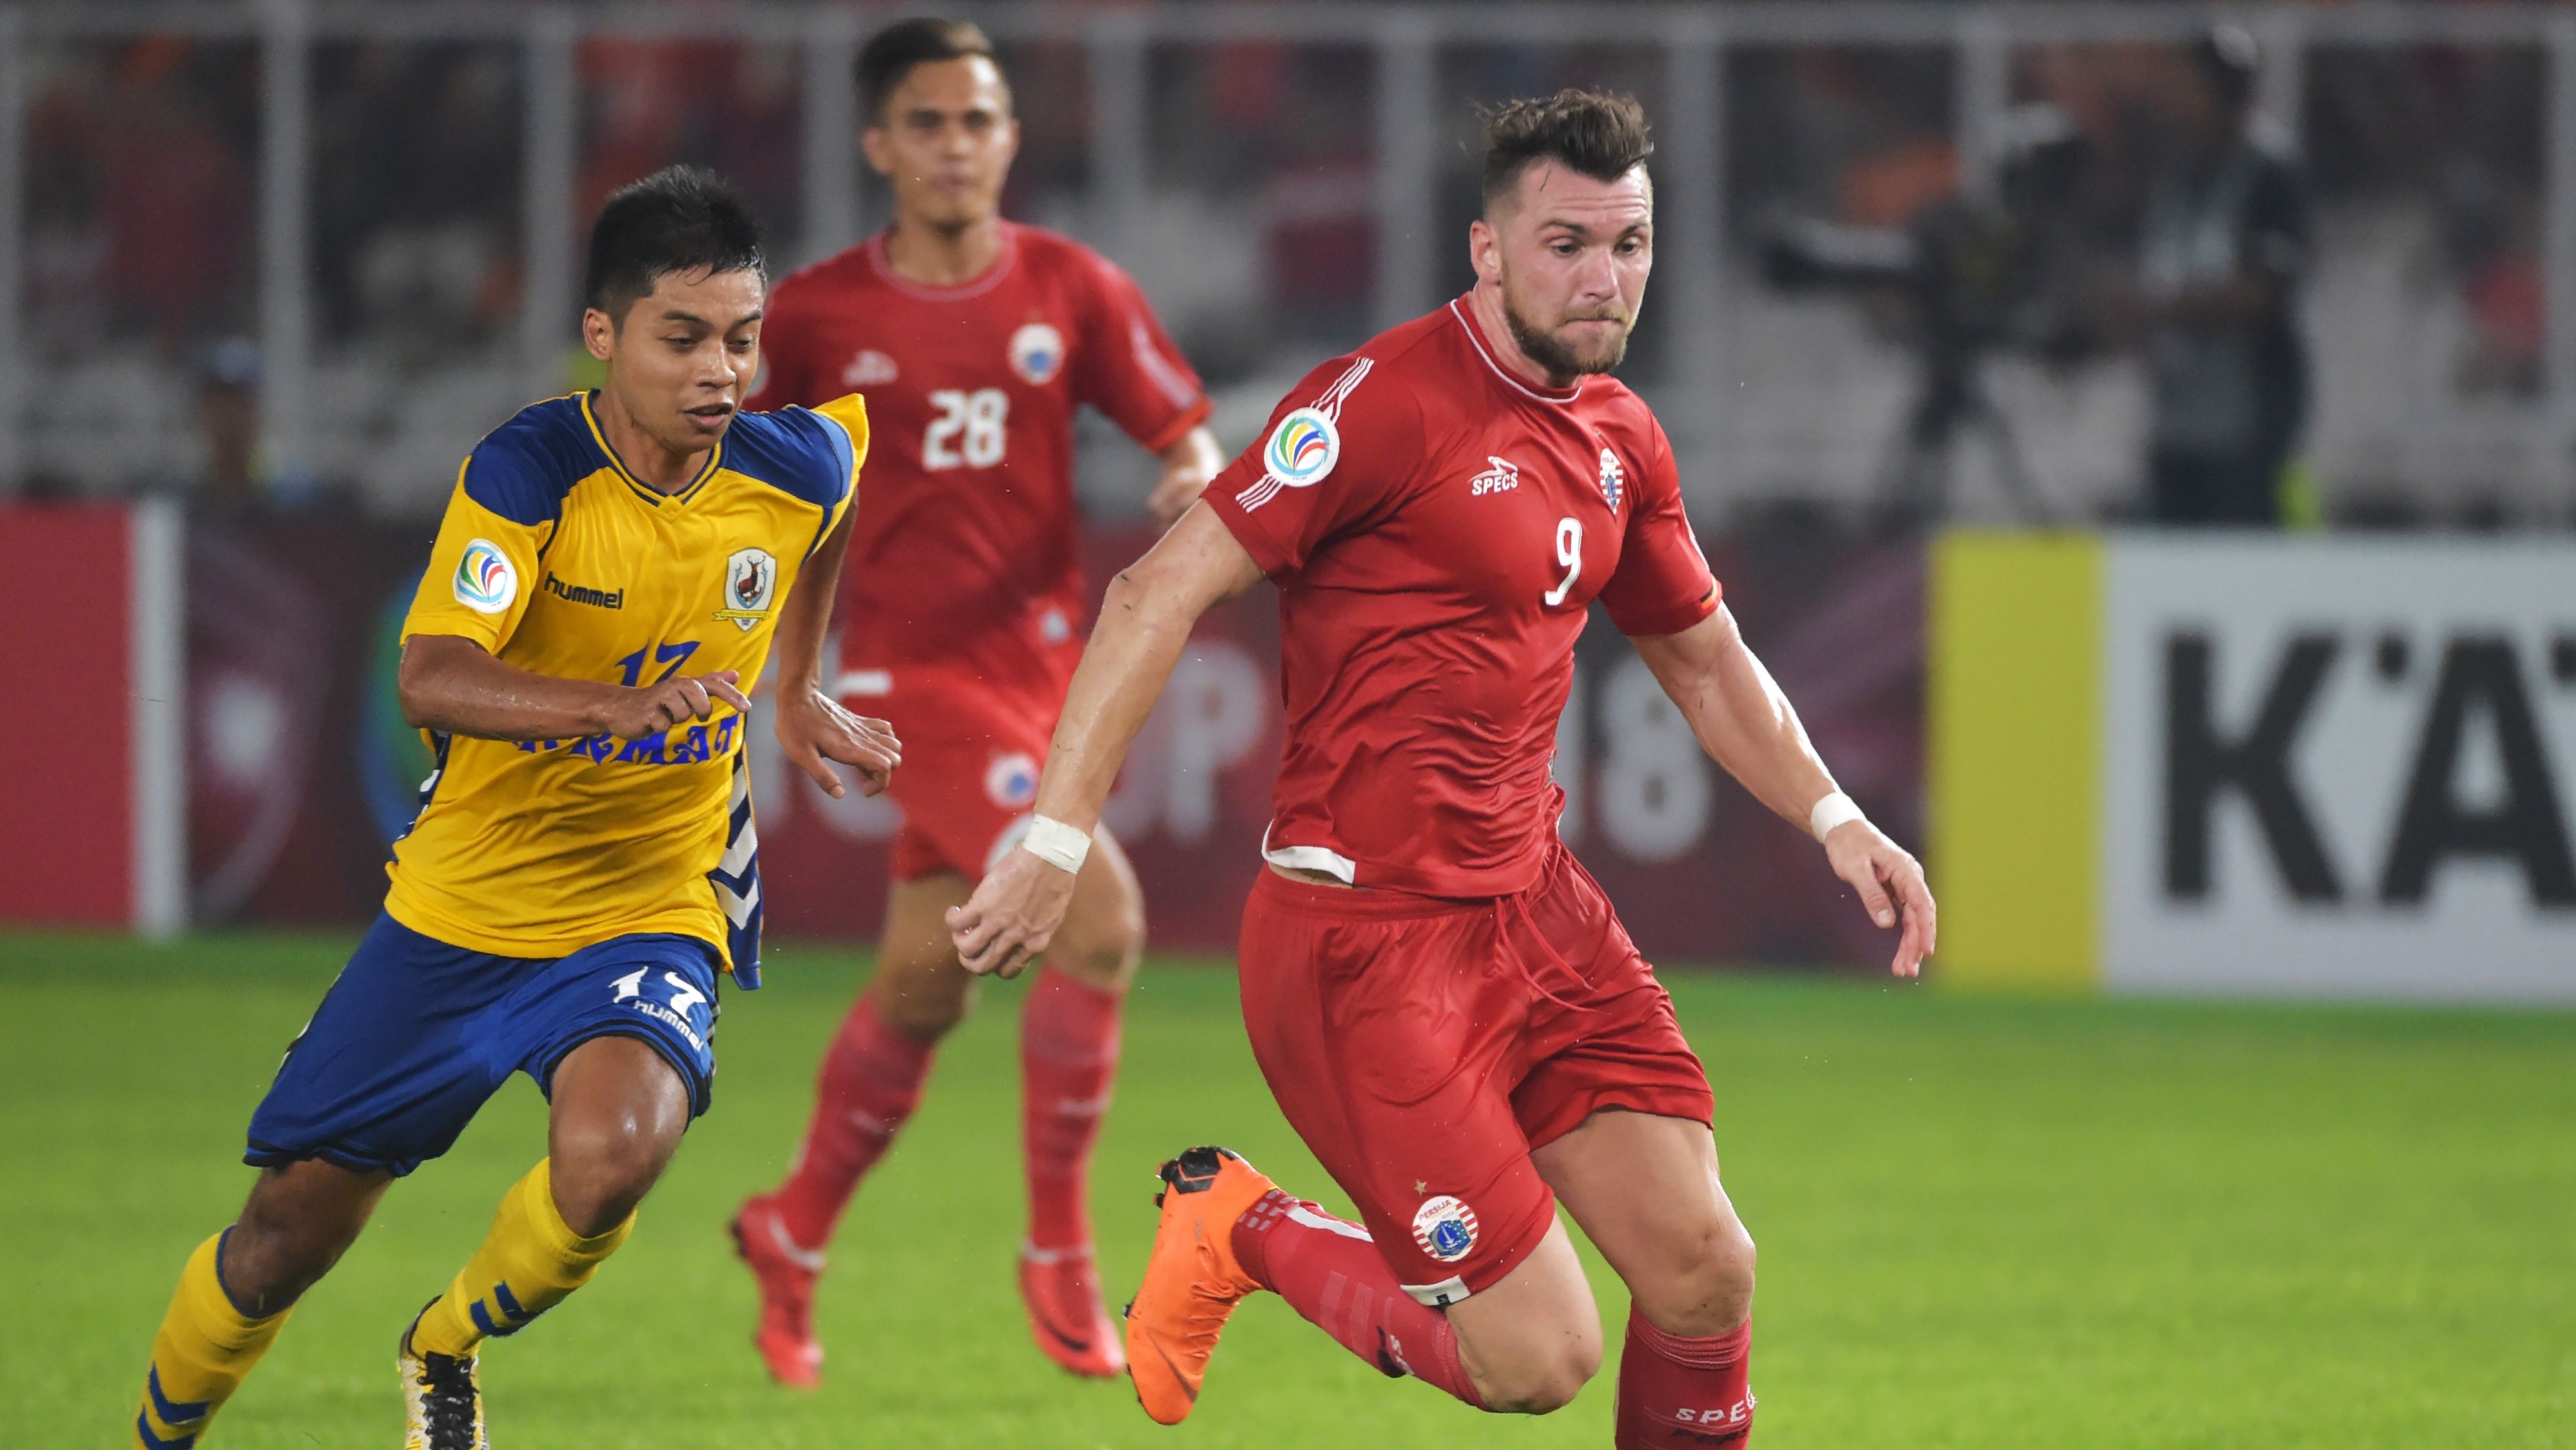 Asian Champions League star Marko Simic charged with assaulting